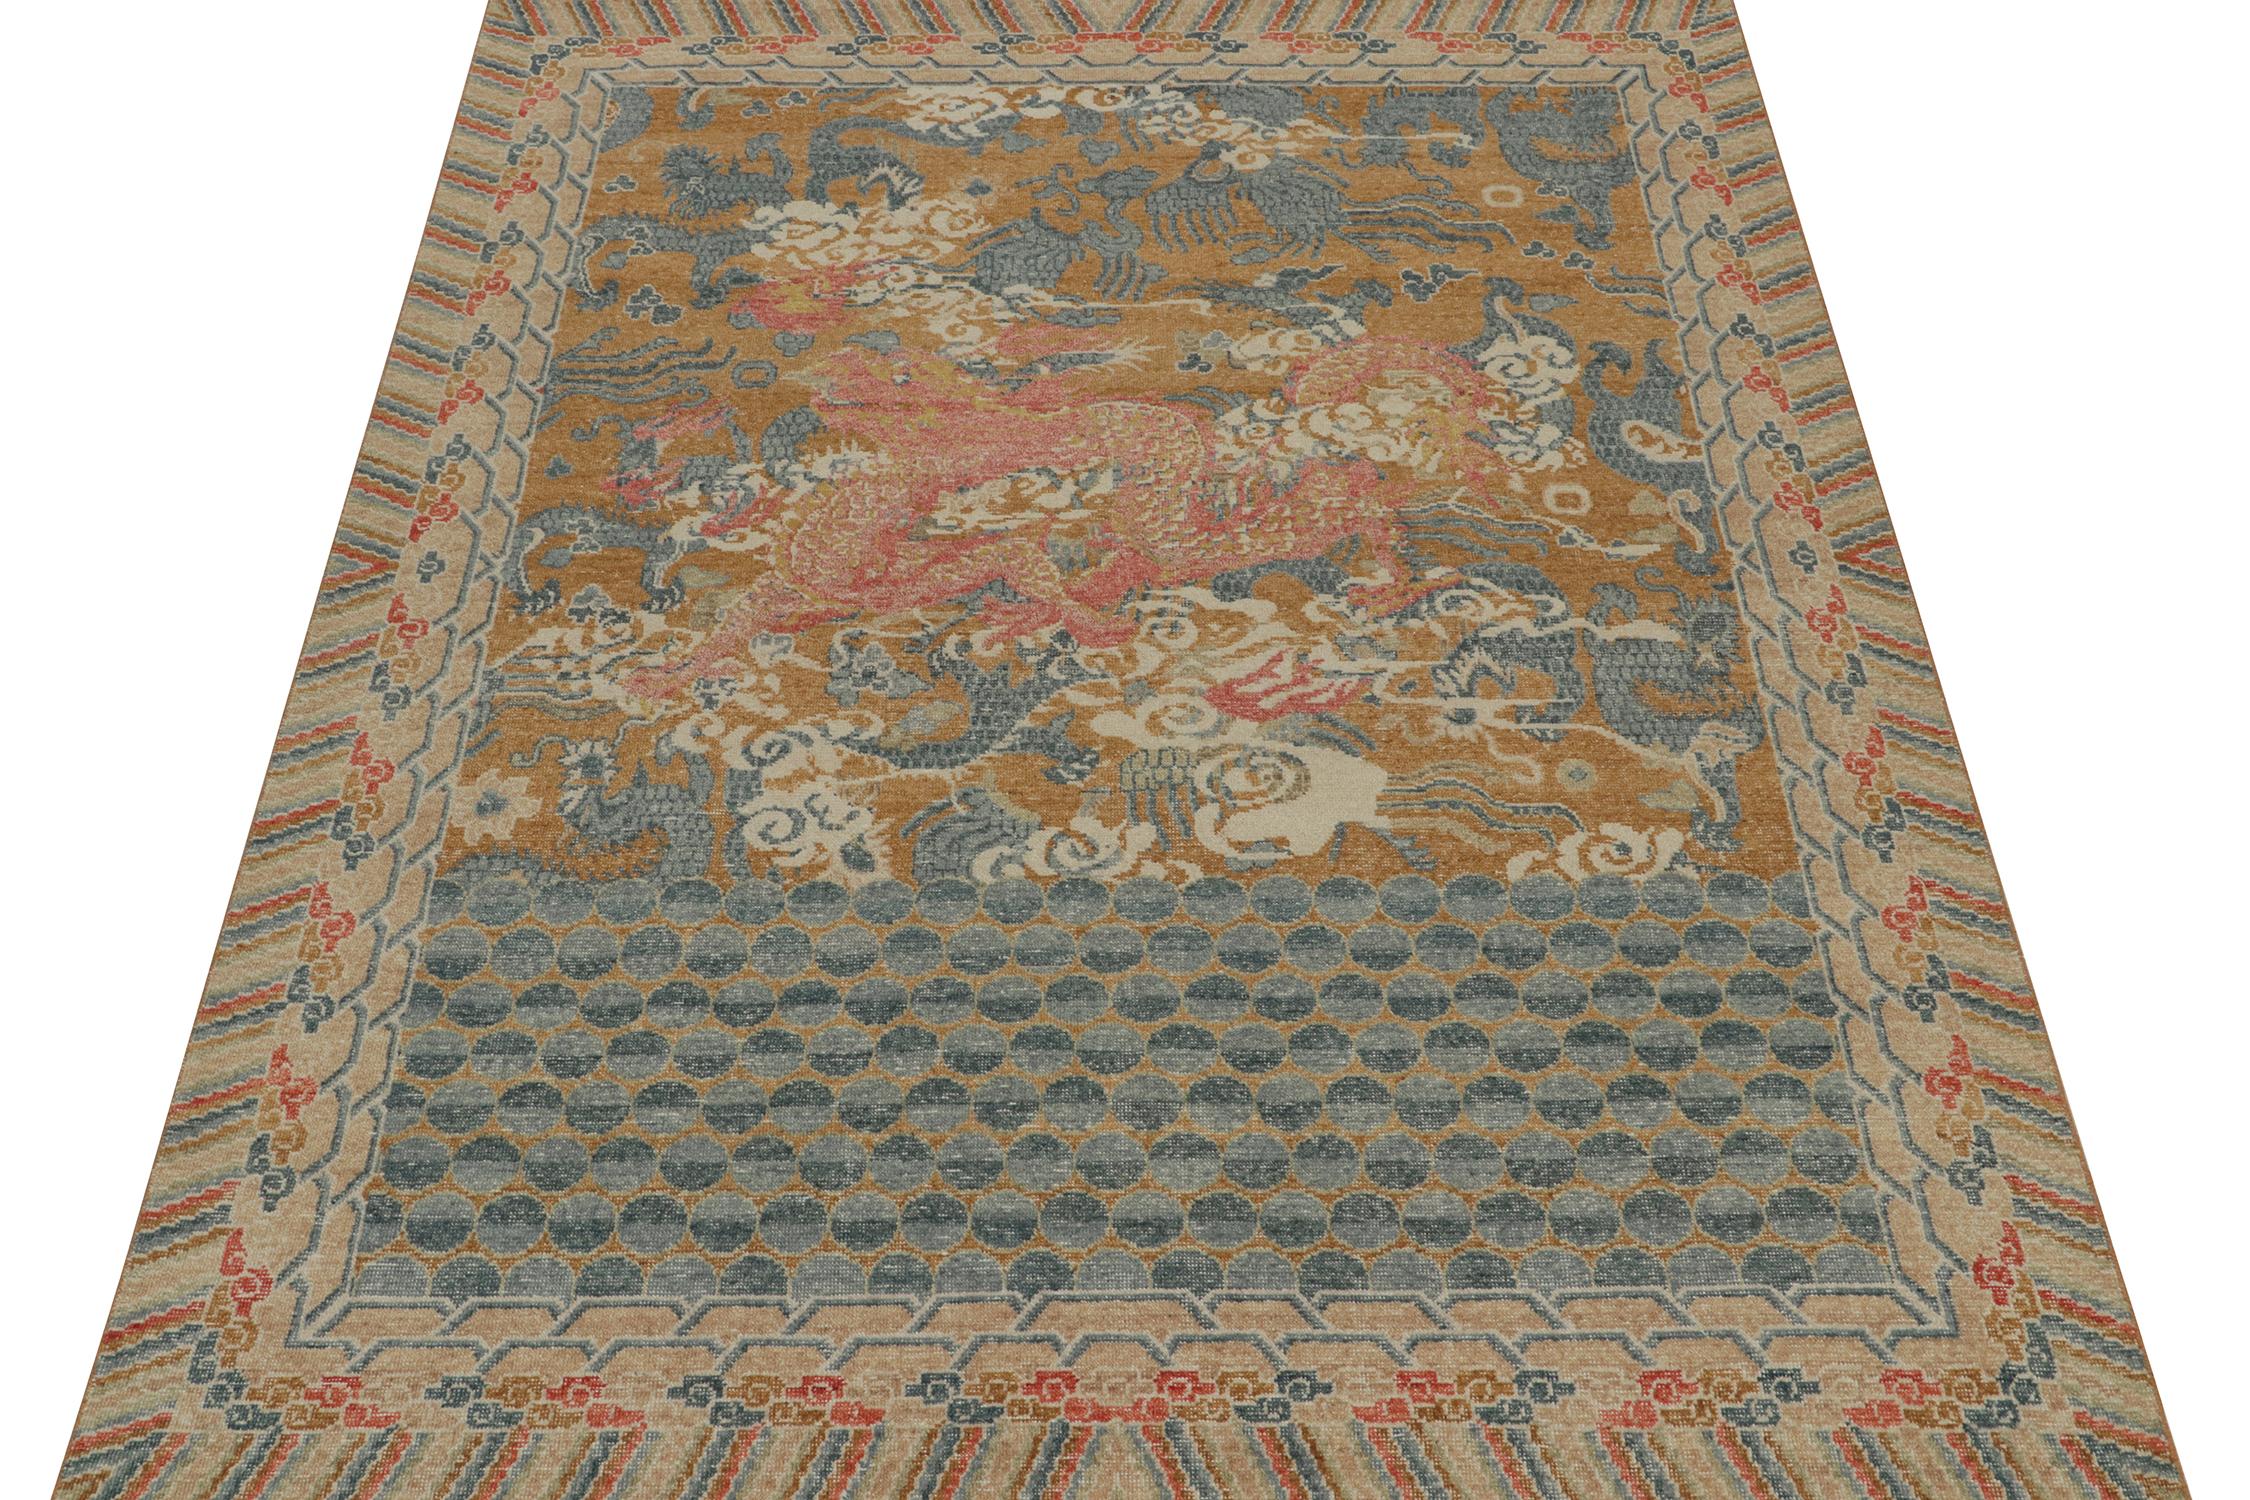 This 8x10 rug is a bold new addition to Rug & Kilim’s Homage Collection. Hand-knotted in wool, its design recaptures antique dragon rugs in a contemporary take on distressed texture. 

Further on the Design:

This particular design draws on